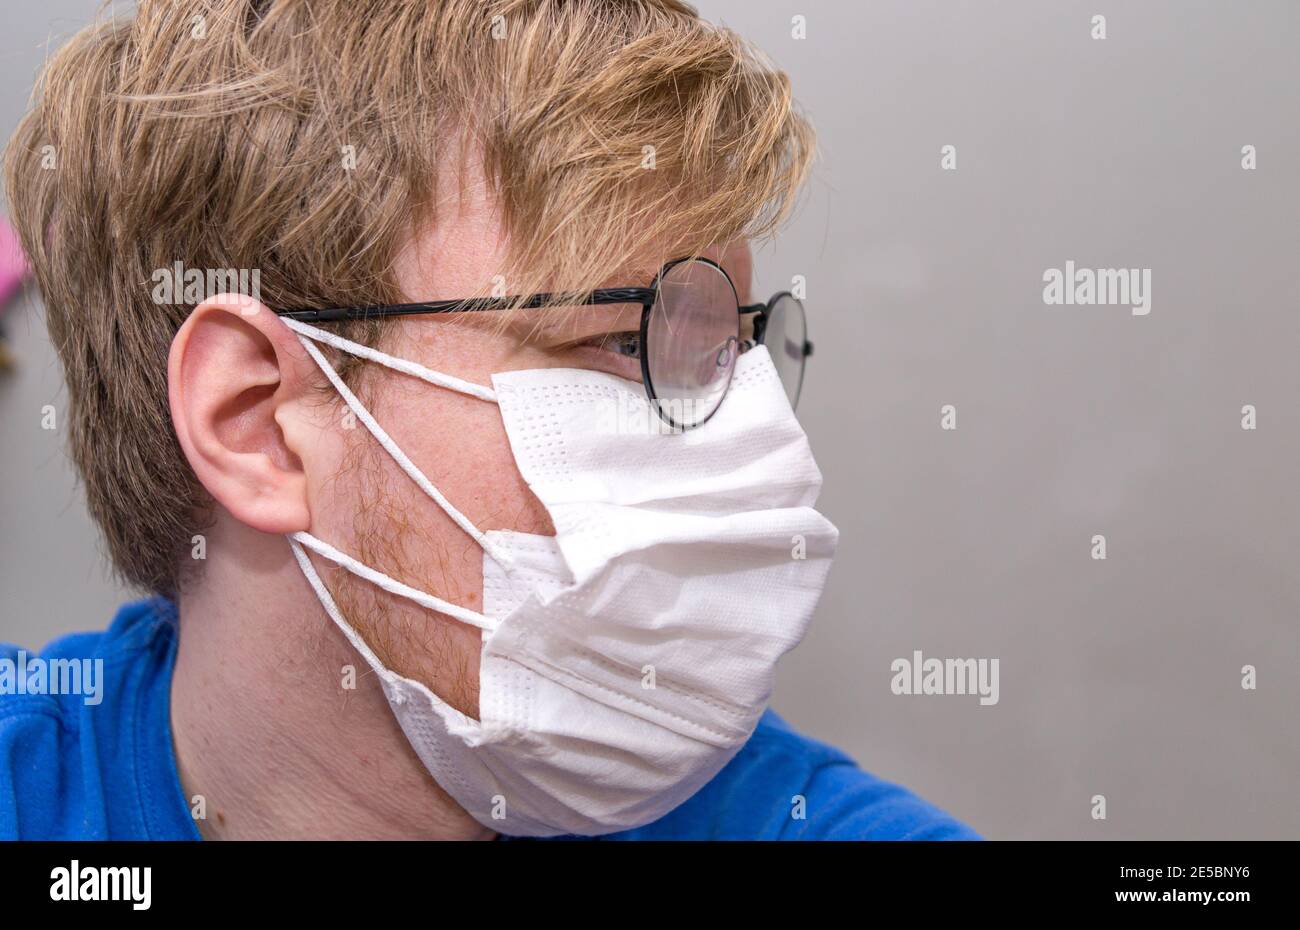 Man wearing two white facemasks for Covid-19 prevention; Round spectacles, white male, blond hair. Side view. Stock Photo